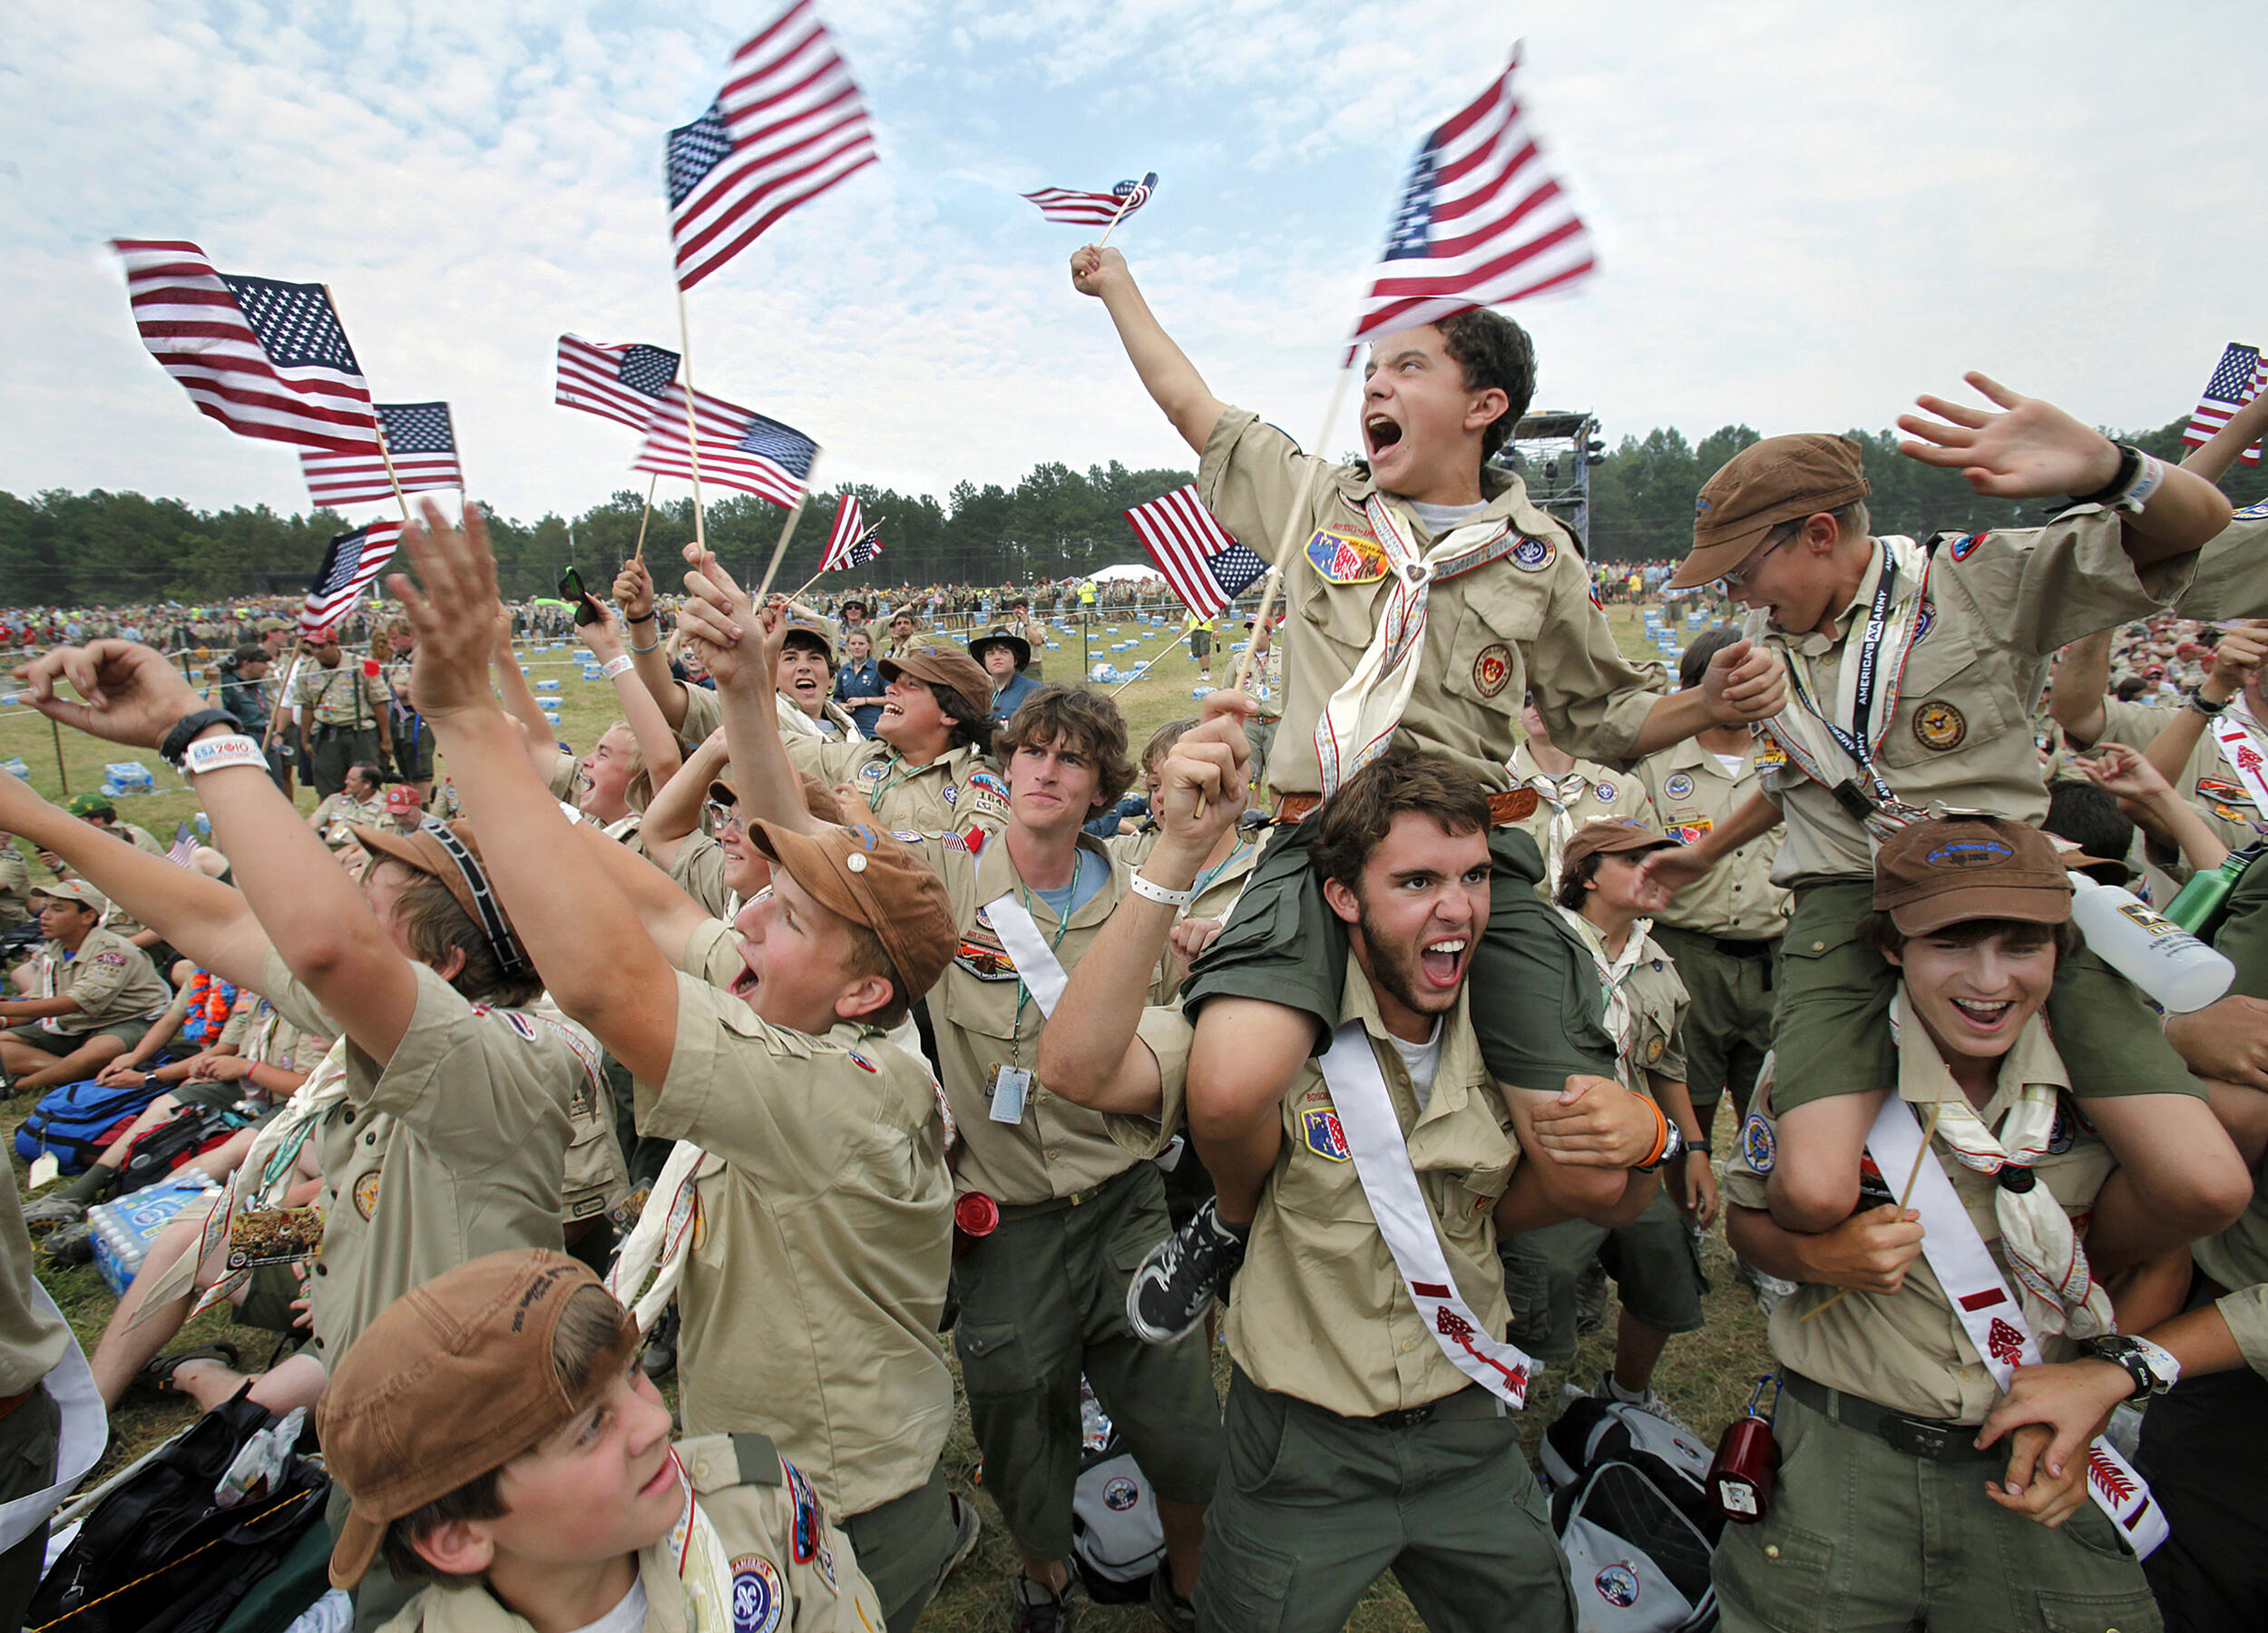 A group of boyscouts cheering and waving American flags